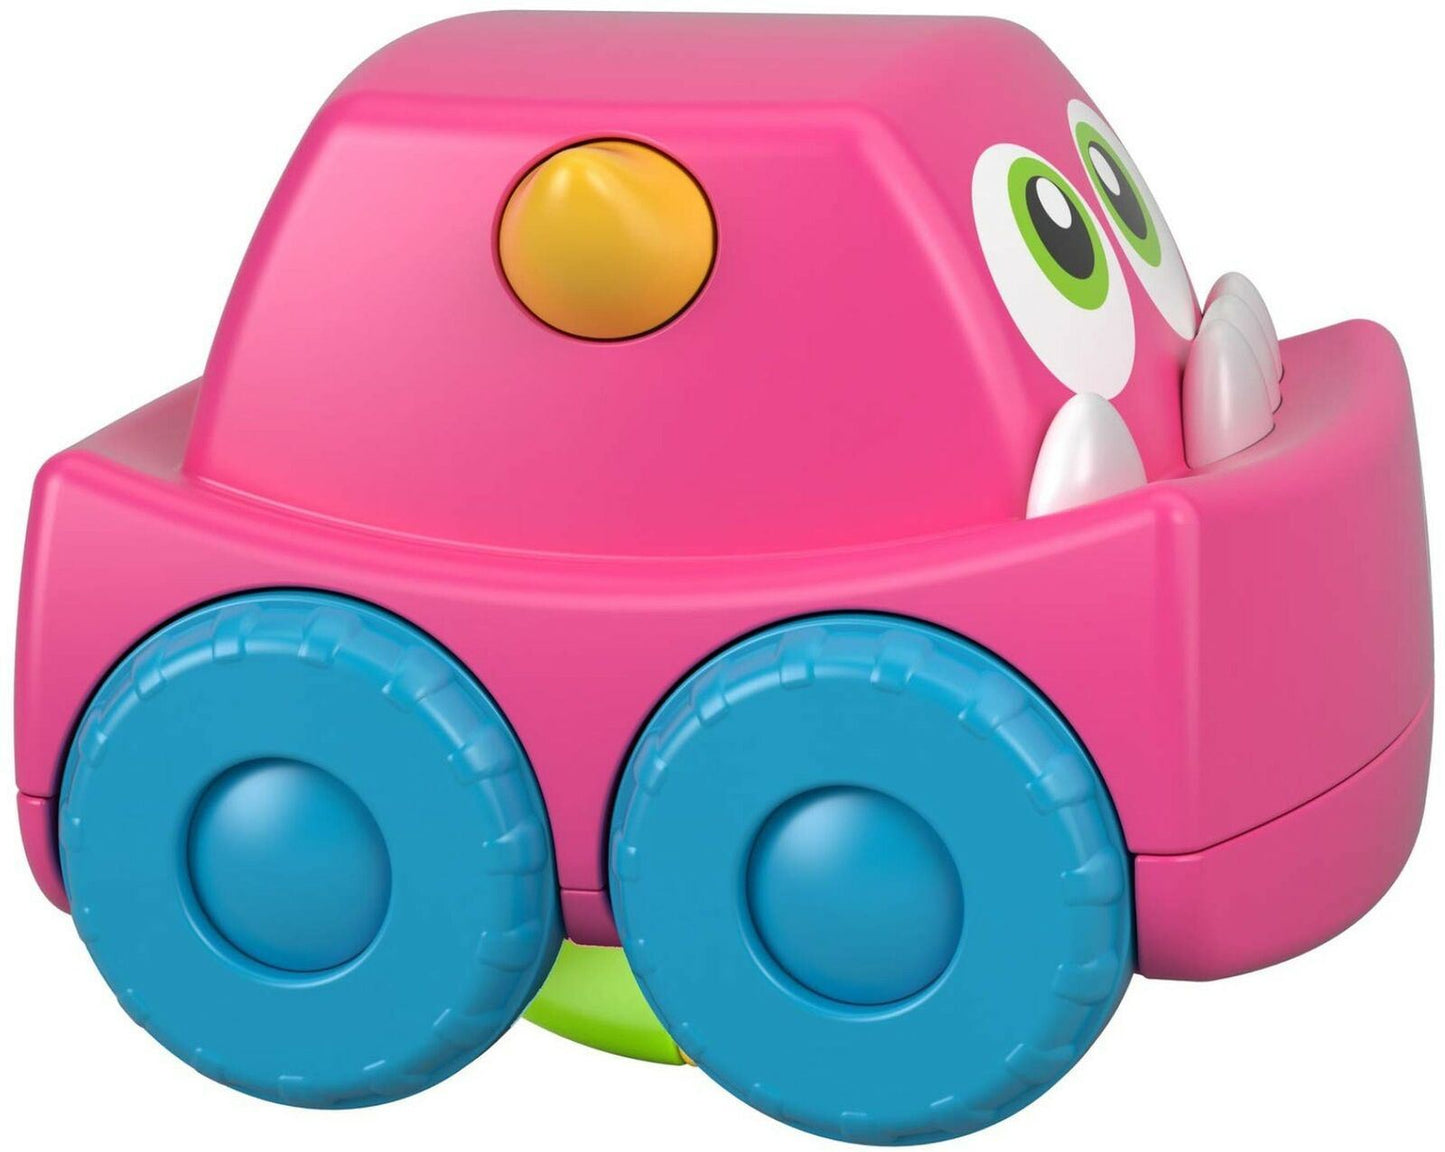 Fisher-Price MINI MONSTER Vehicle #4 Pink Toy Car Baby Vehicle Truck